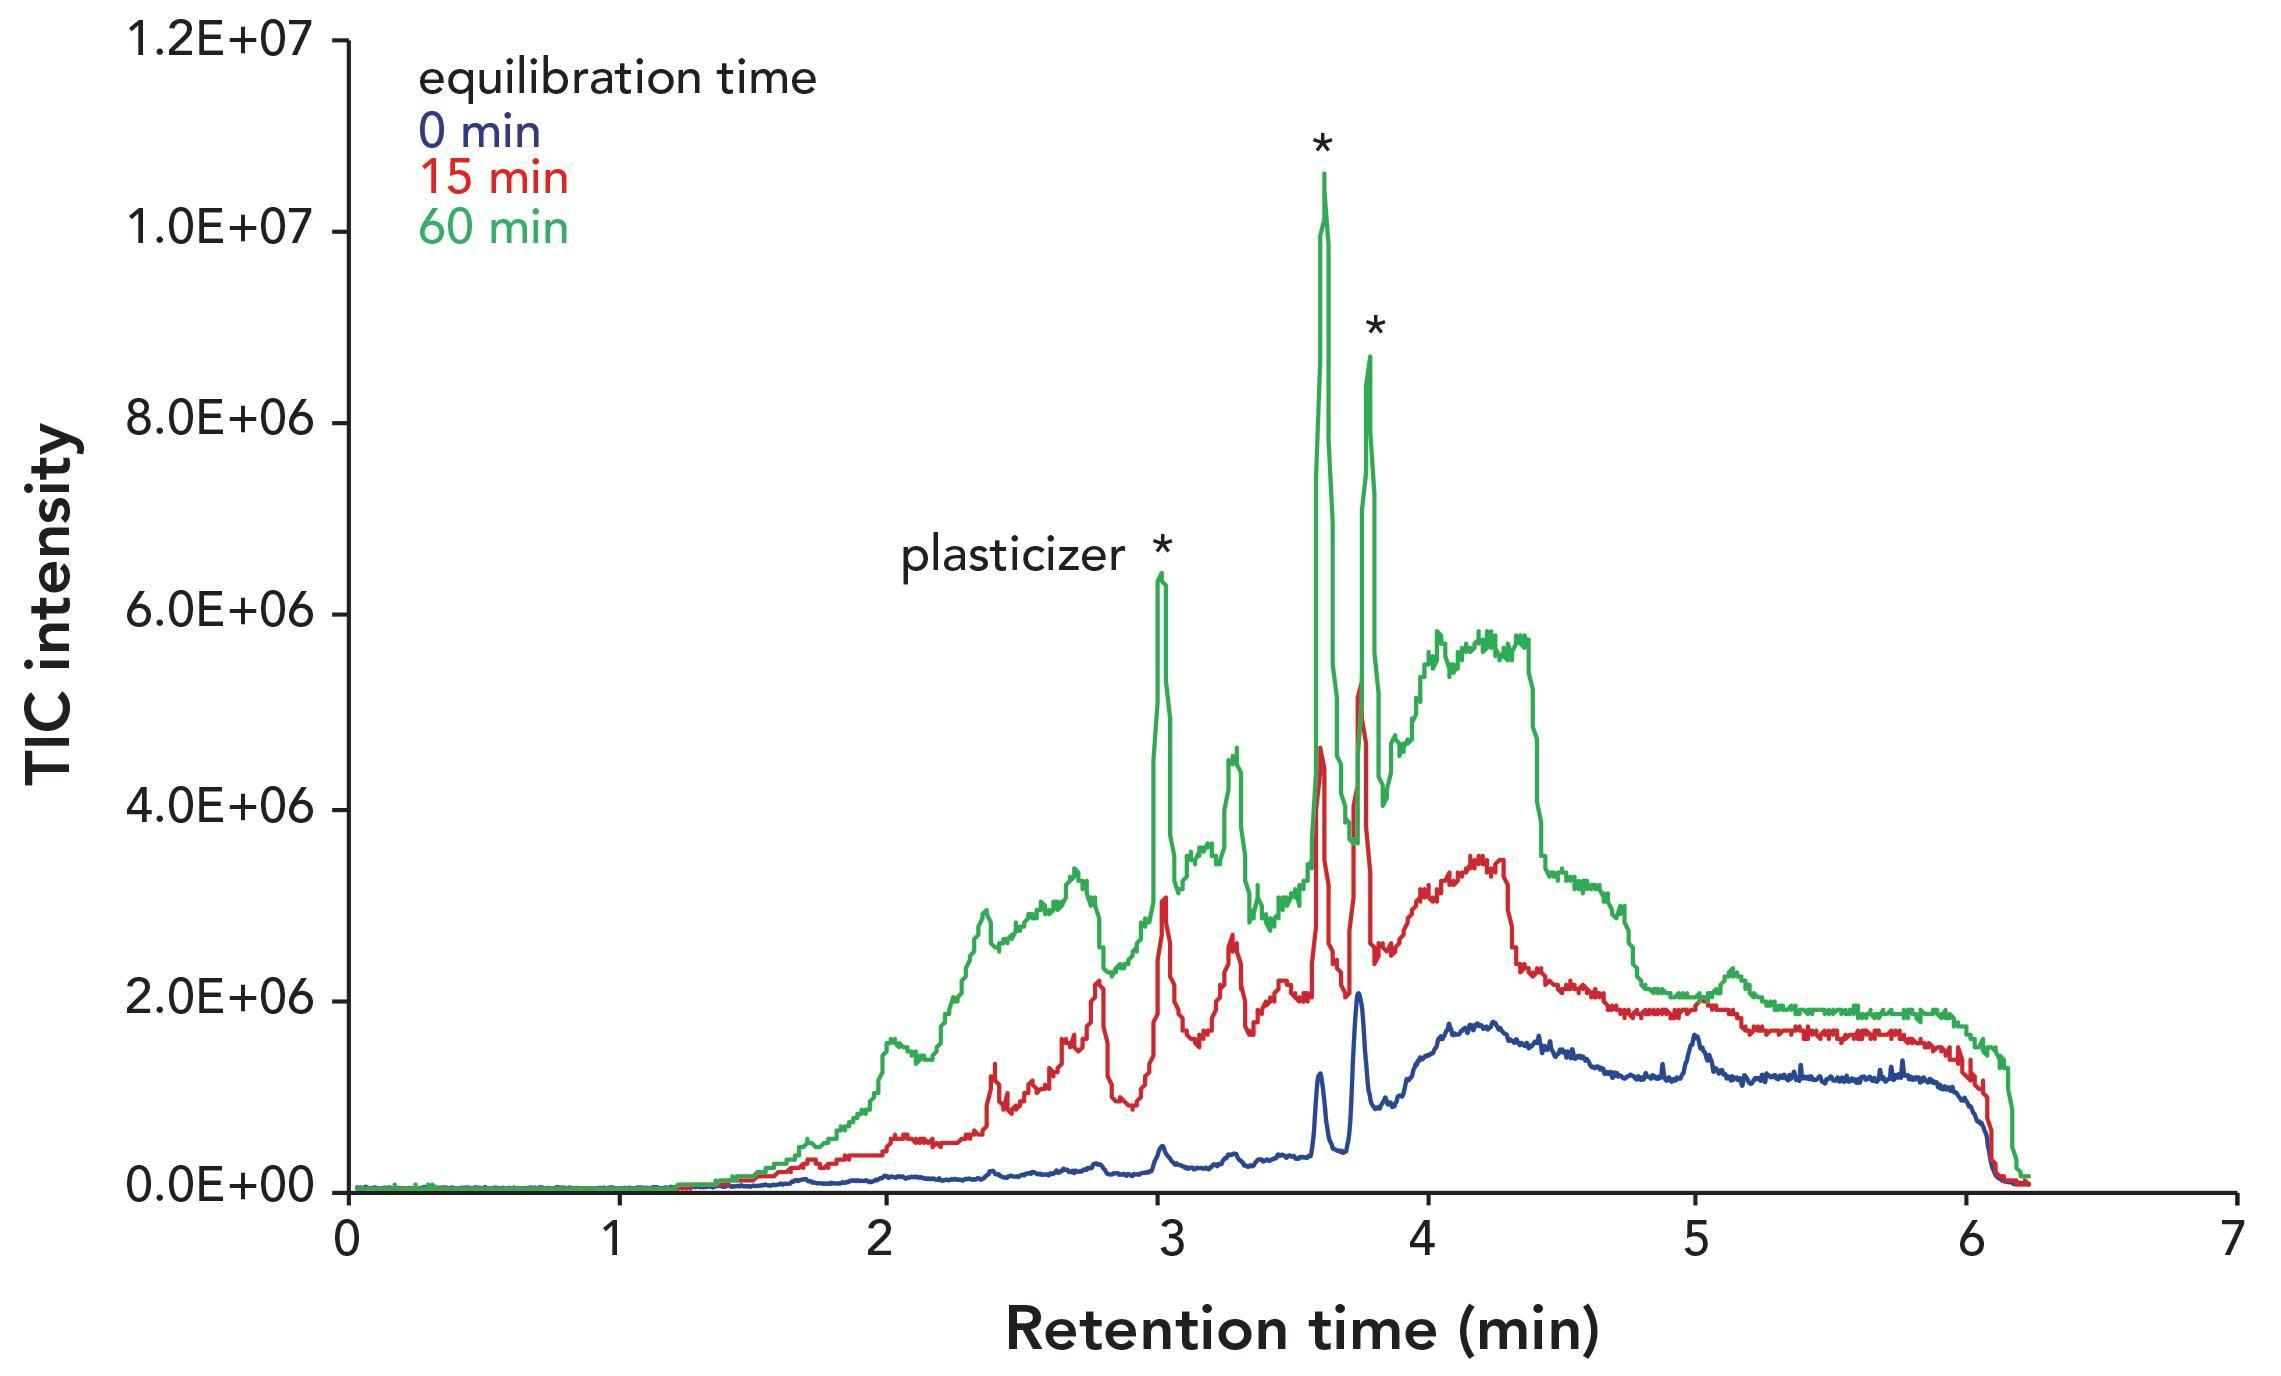 FIGURE 1: Total ion chromatogram showing the effect of varying the equilibration times prior to a gradient run (for details see inset; asterisks indicate peaks derived from plasticizers).